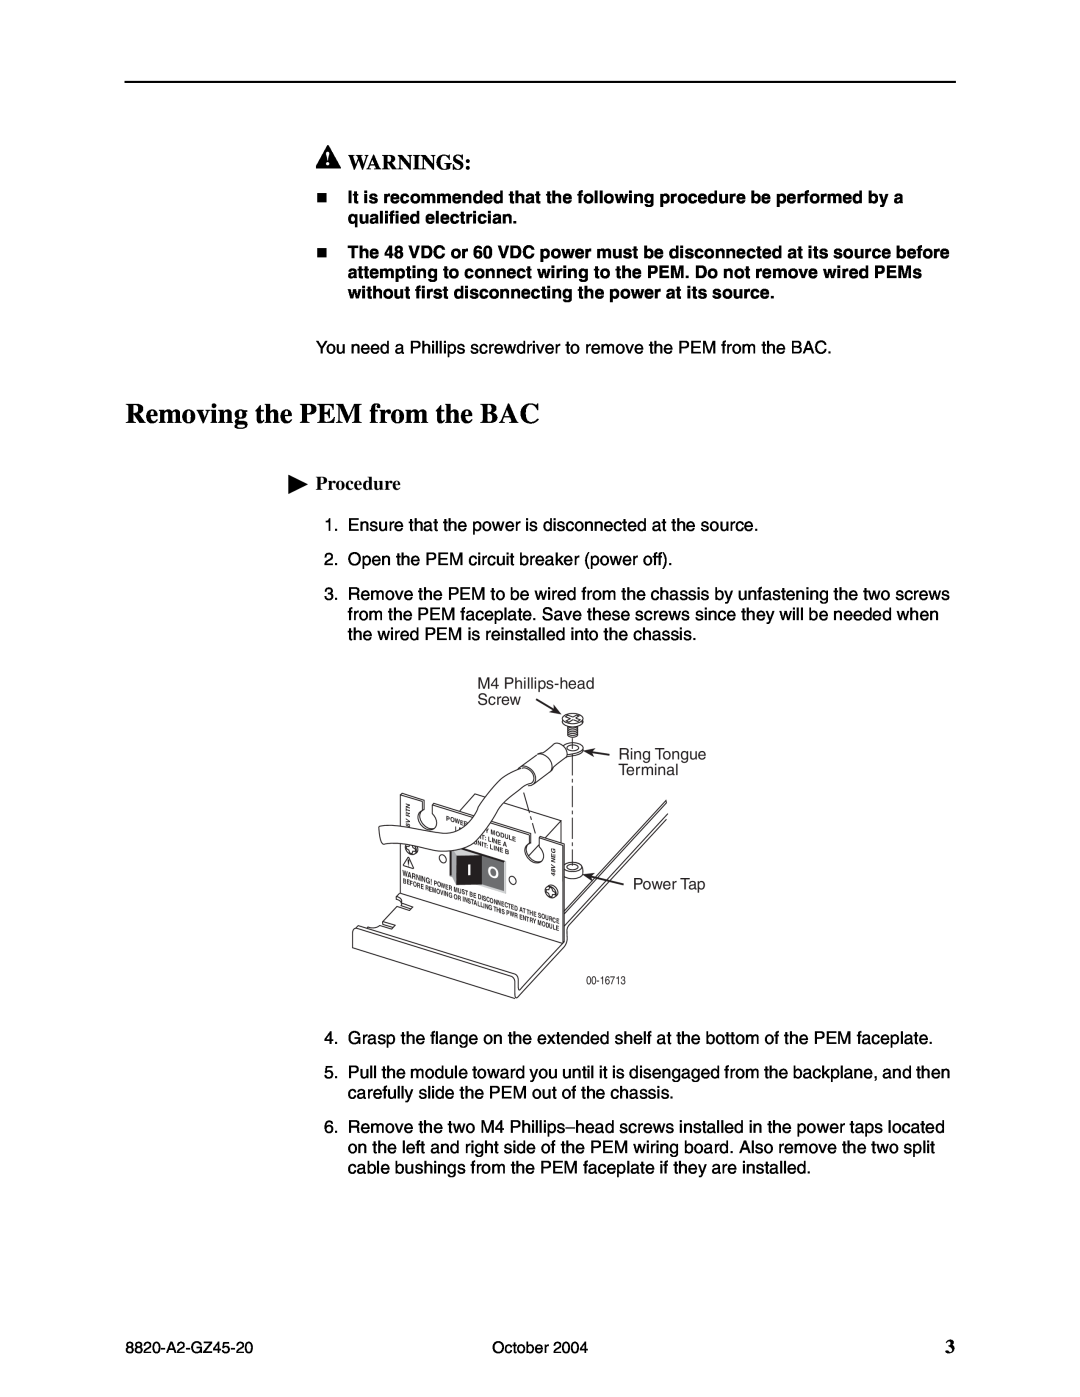 Paradyne 8820-S1-906, 8820-S2-903 installation instructions Removing the PEM from the BAC, Warnings, Procedure 